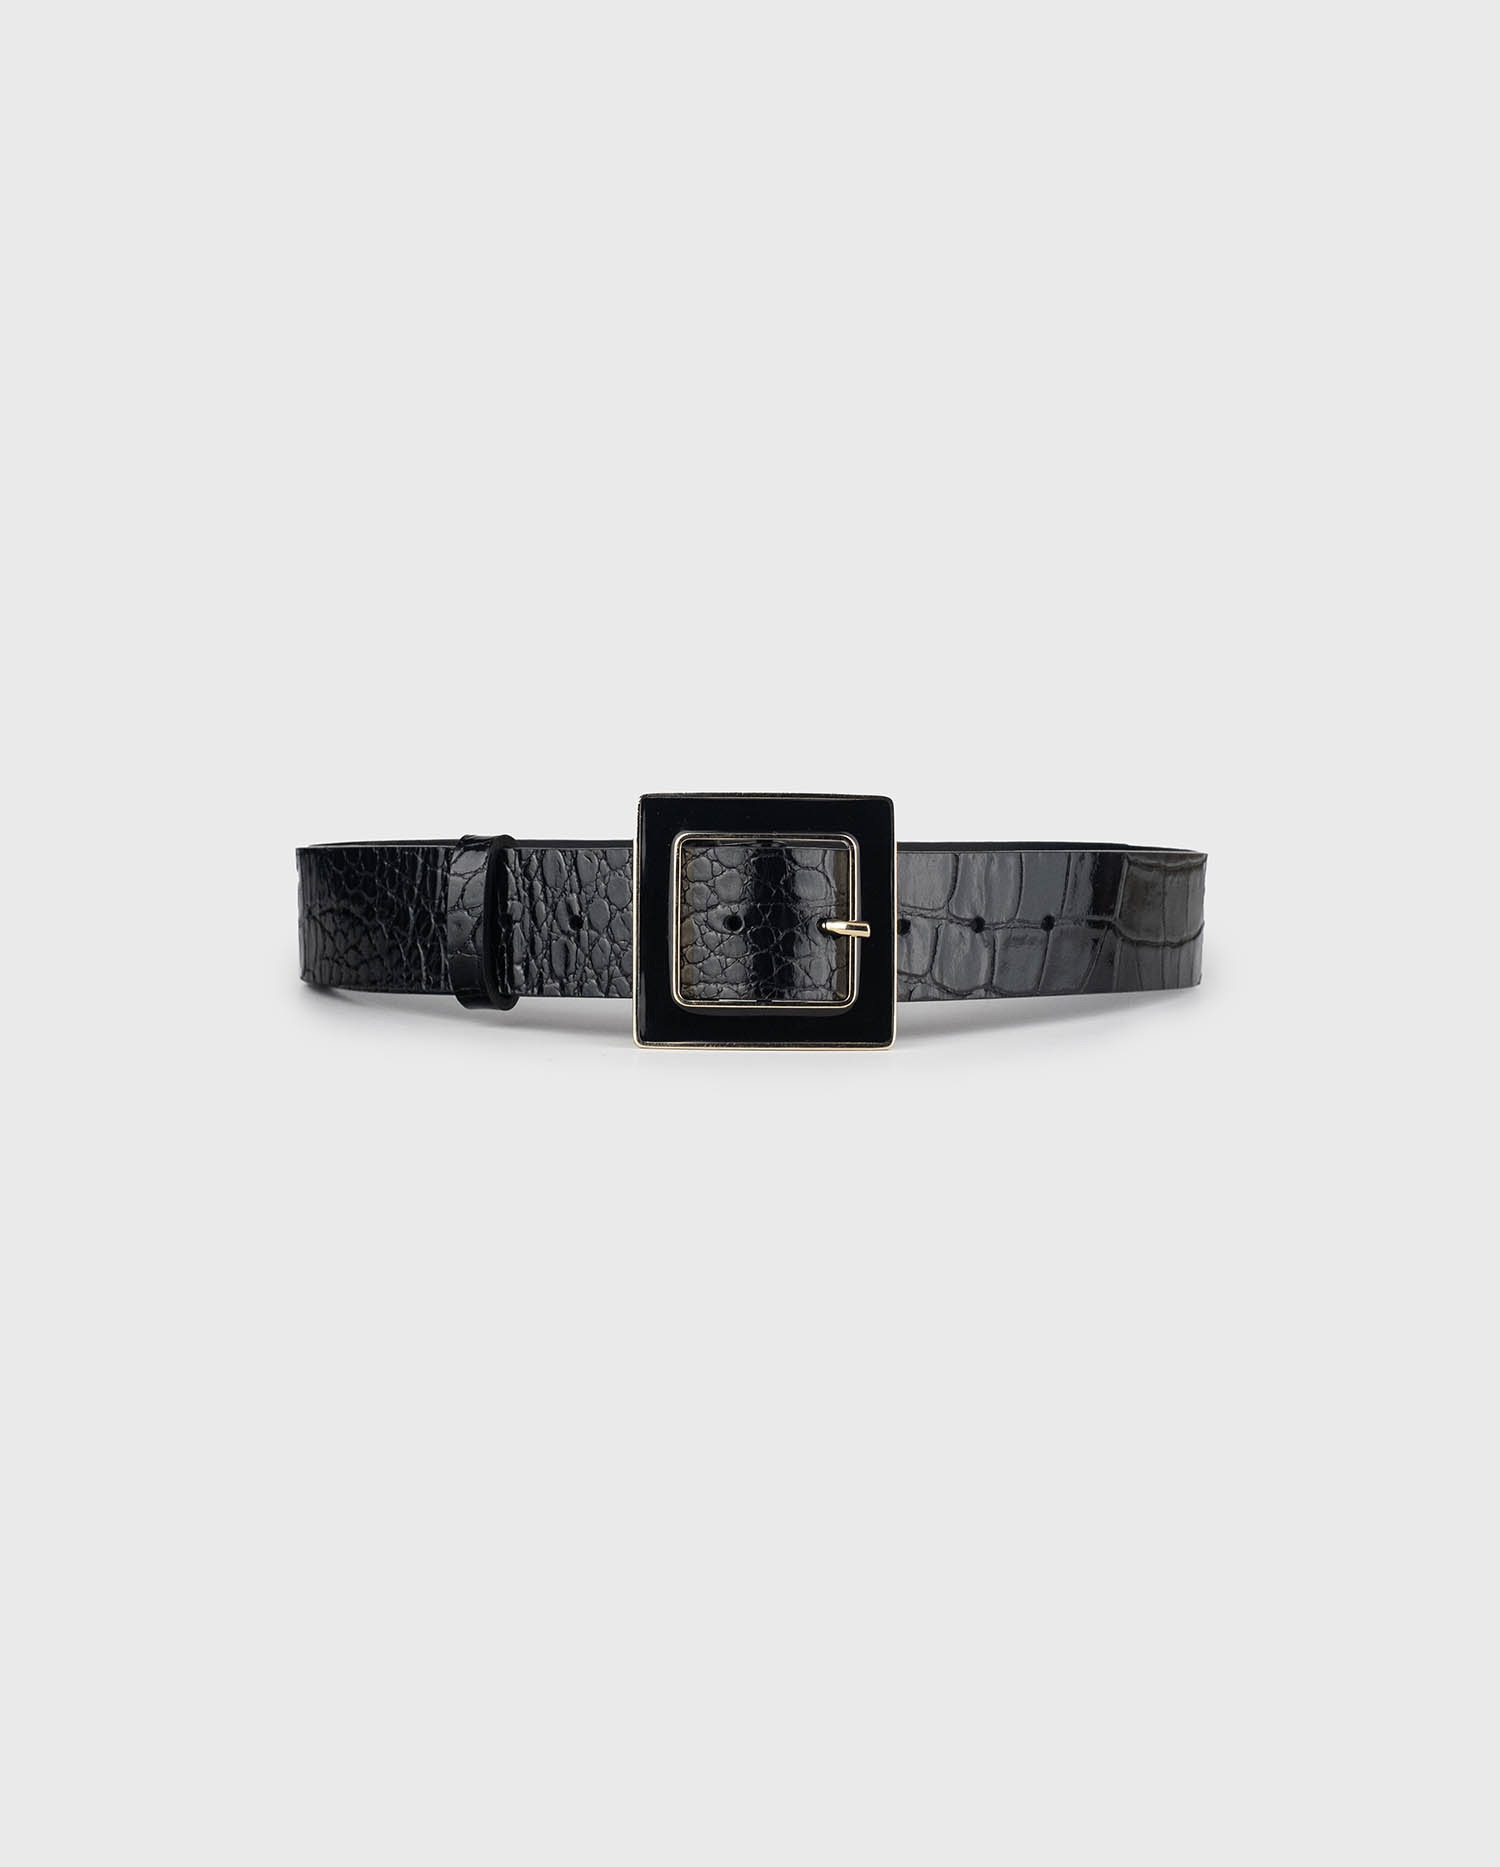 Discover the NORTH Croc-Embossed Leather Belt in a Glossy Black